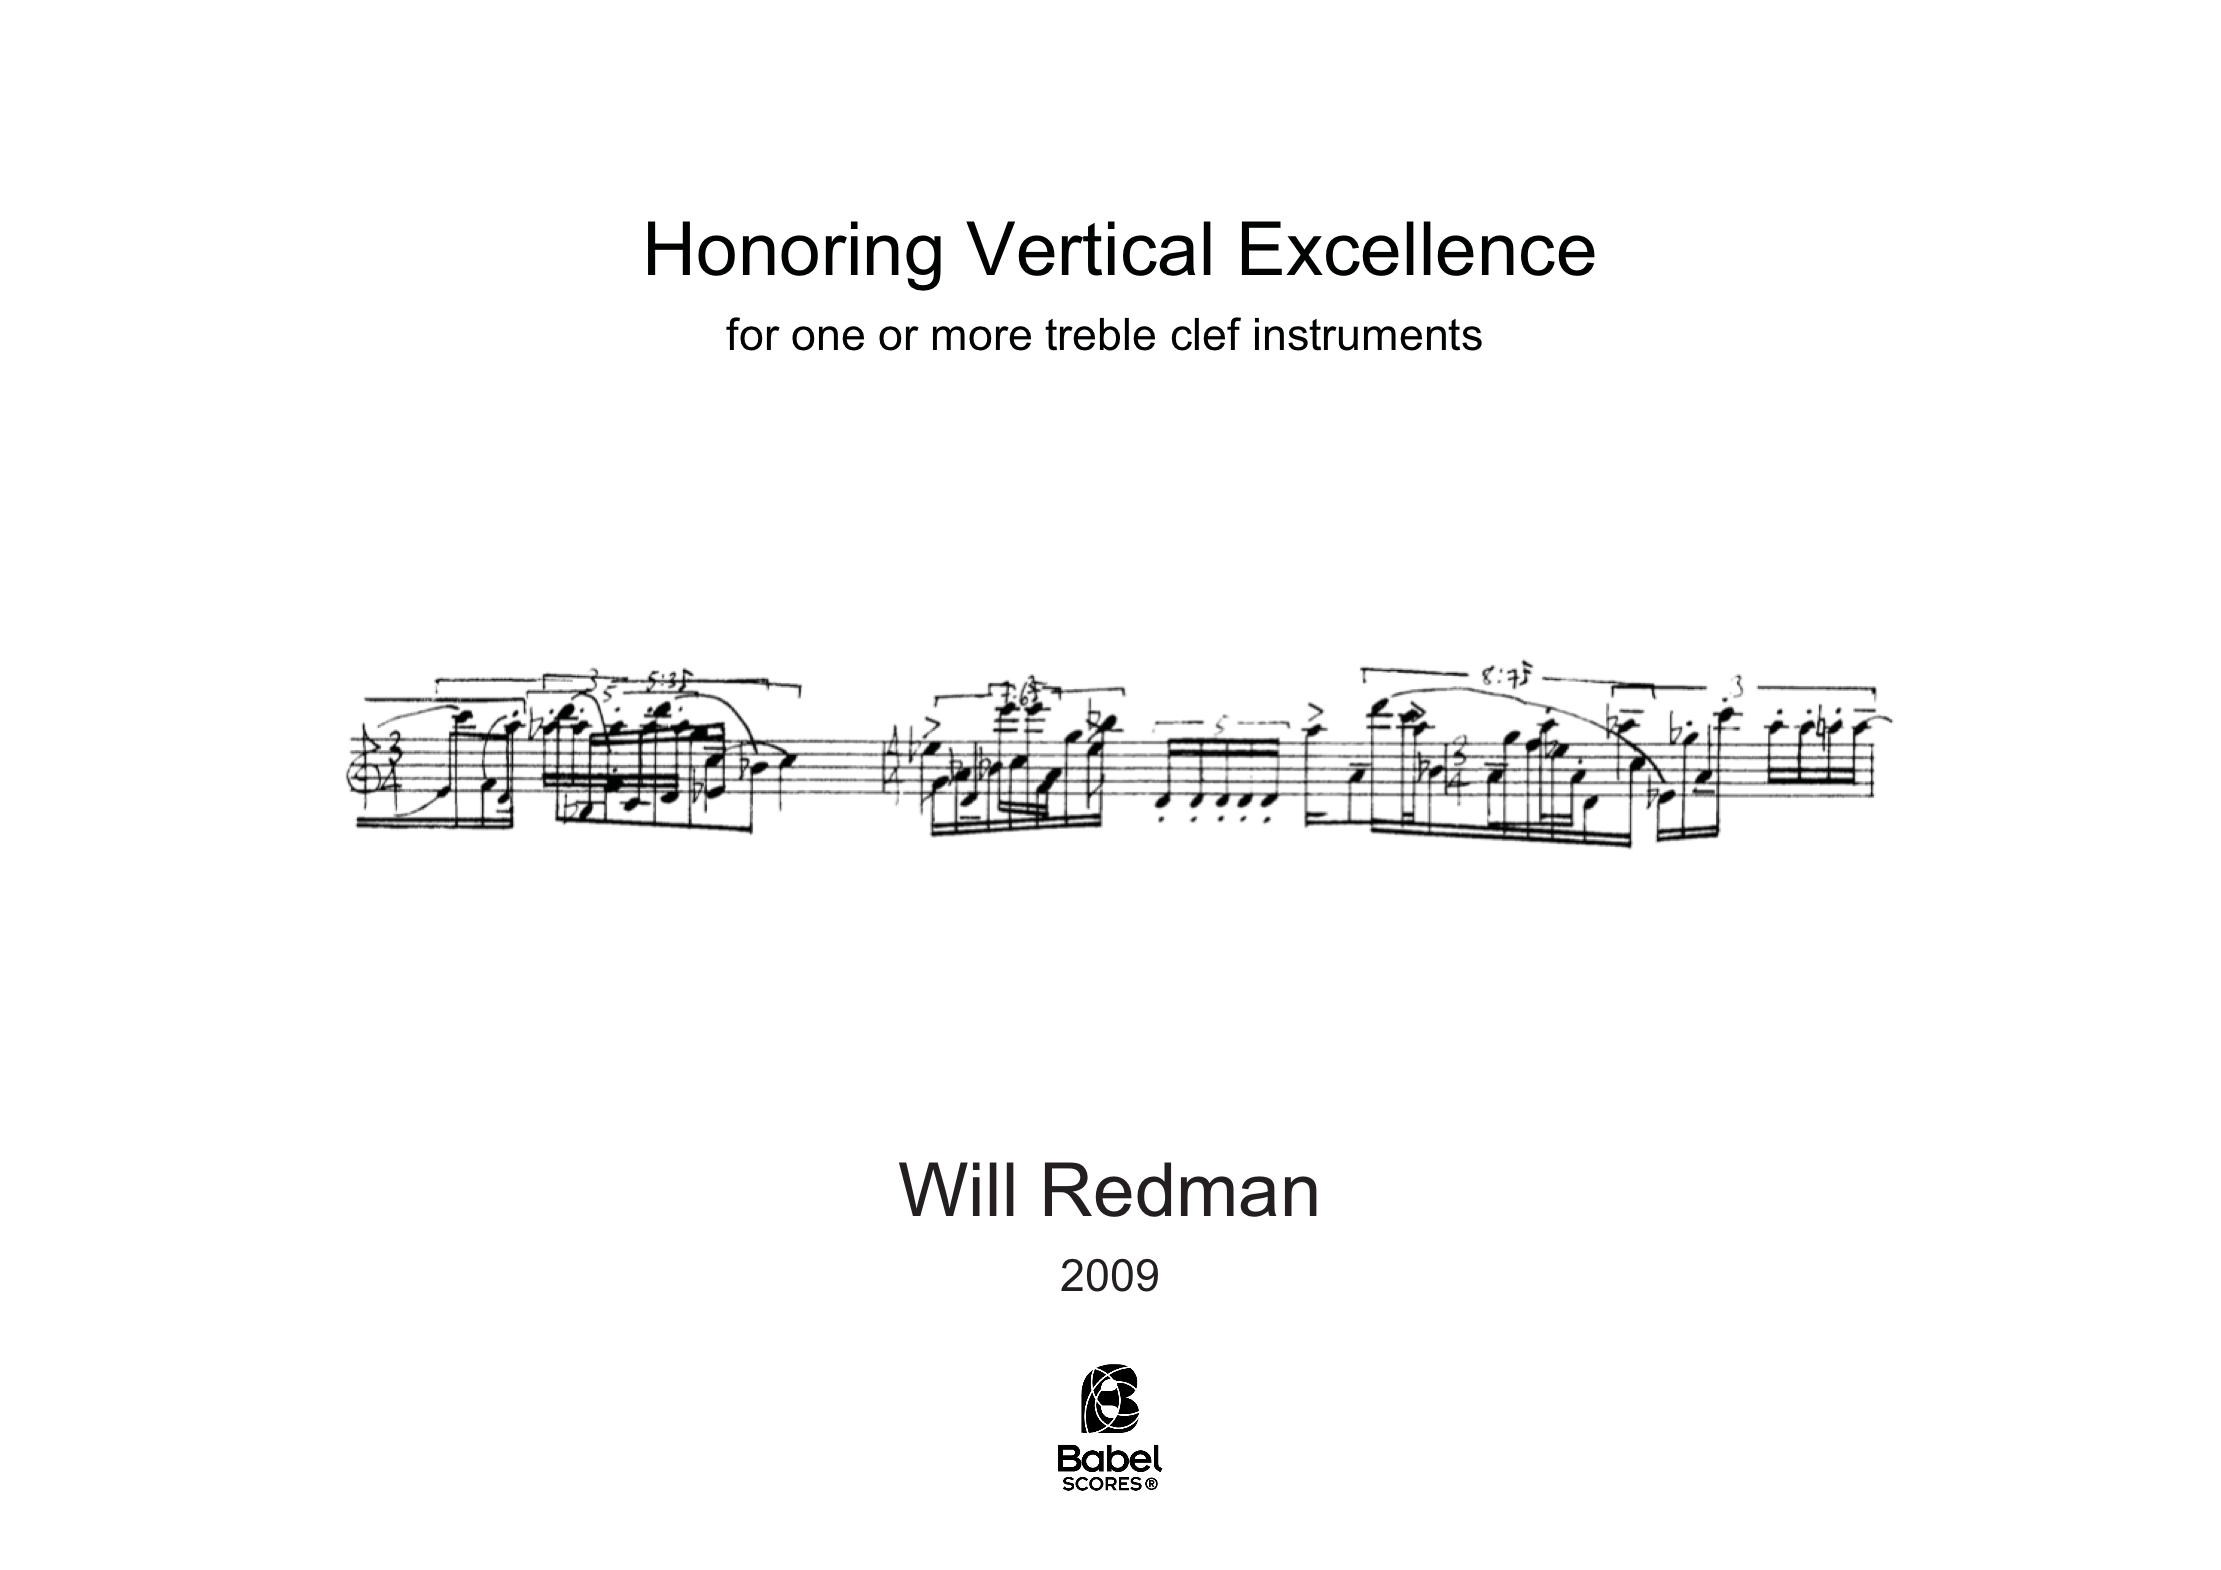 Honoring Vertical Excellence A4 z